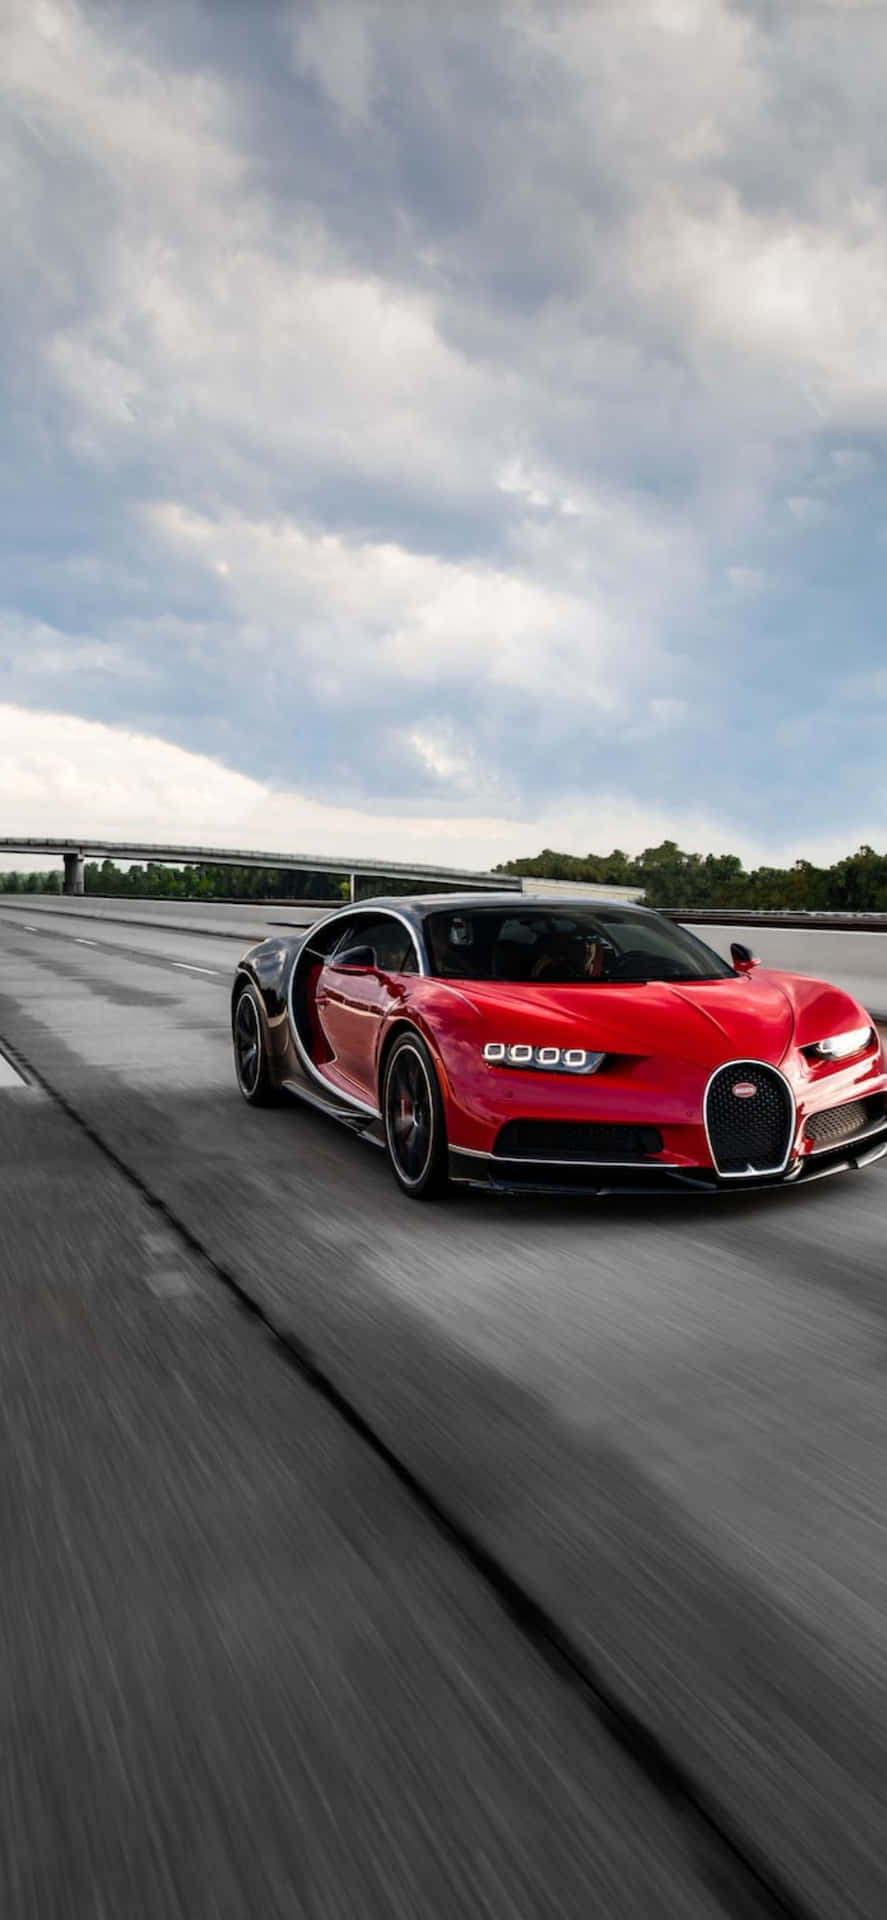 A Bugatti for Your iPhone XS